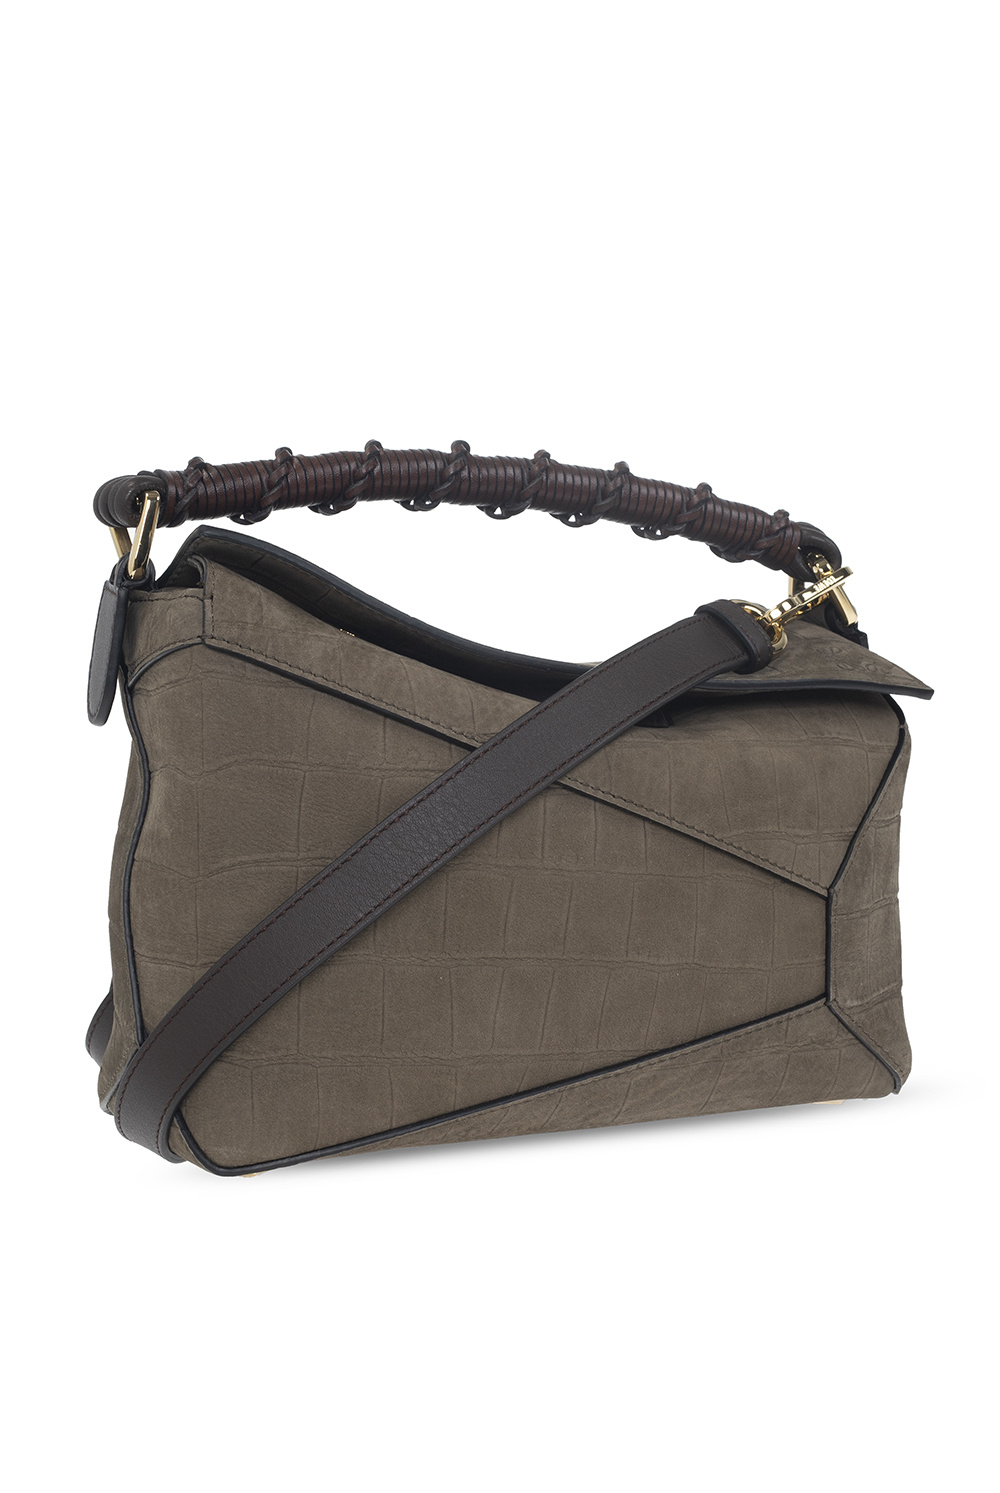 Women's Small Puzzle bag in shearling, LOEWE